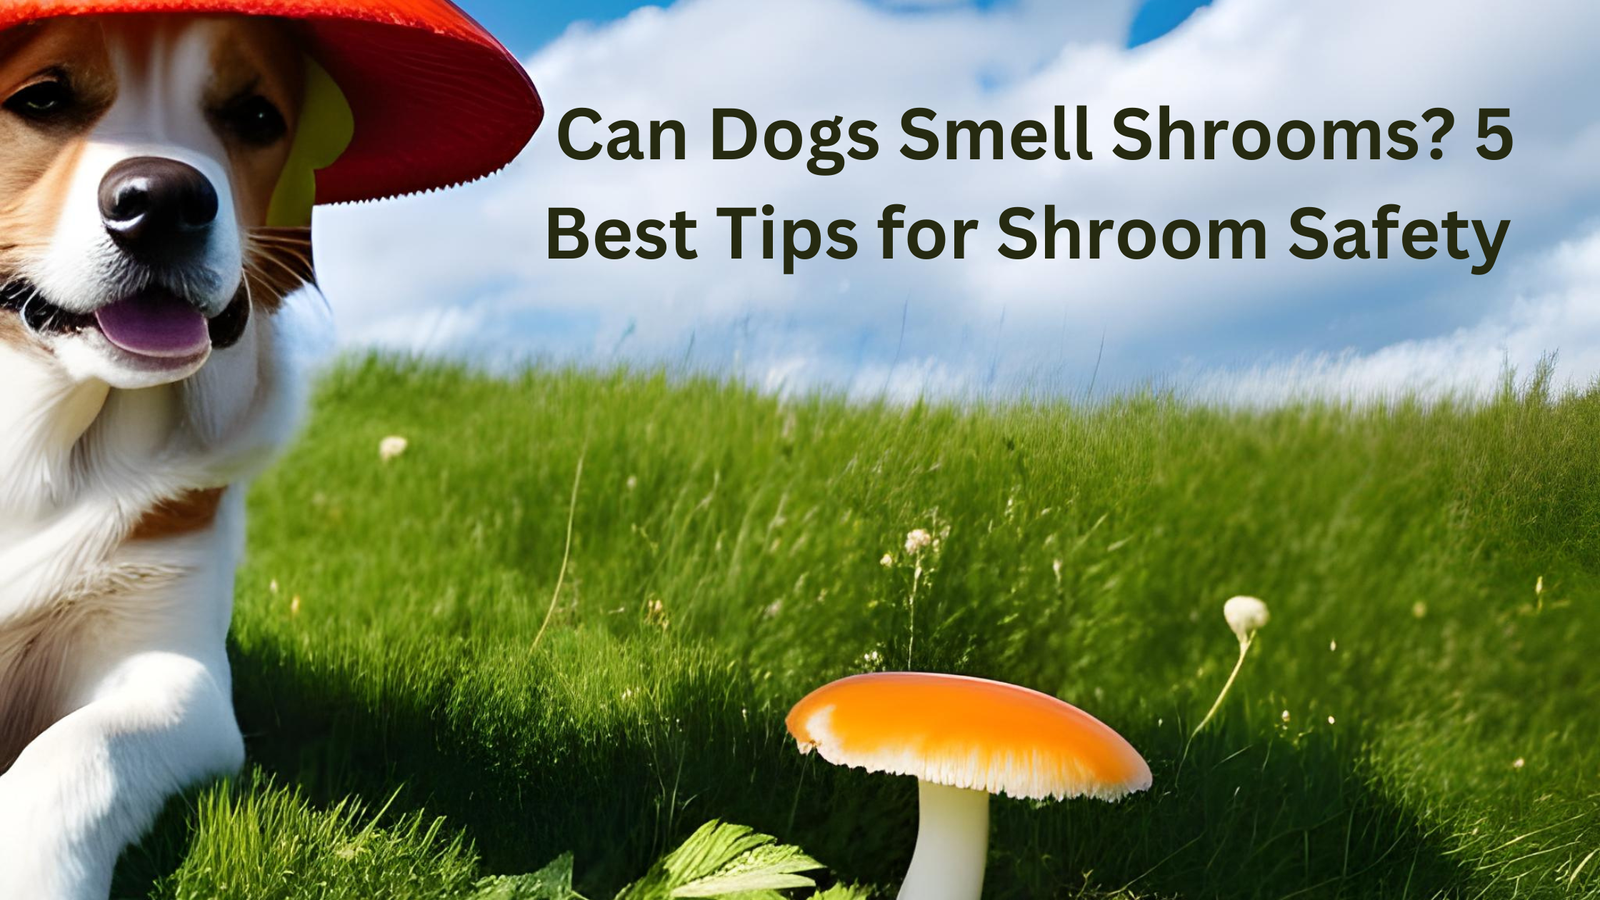 Can Dogs Smell Shrooms? 5 Best Tips for Shroom Safety